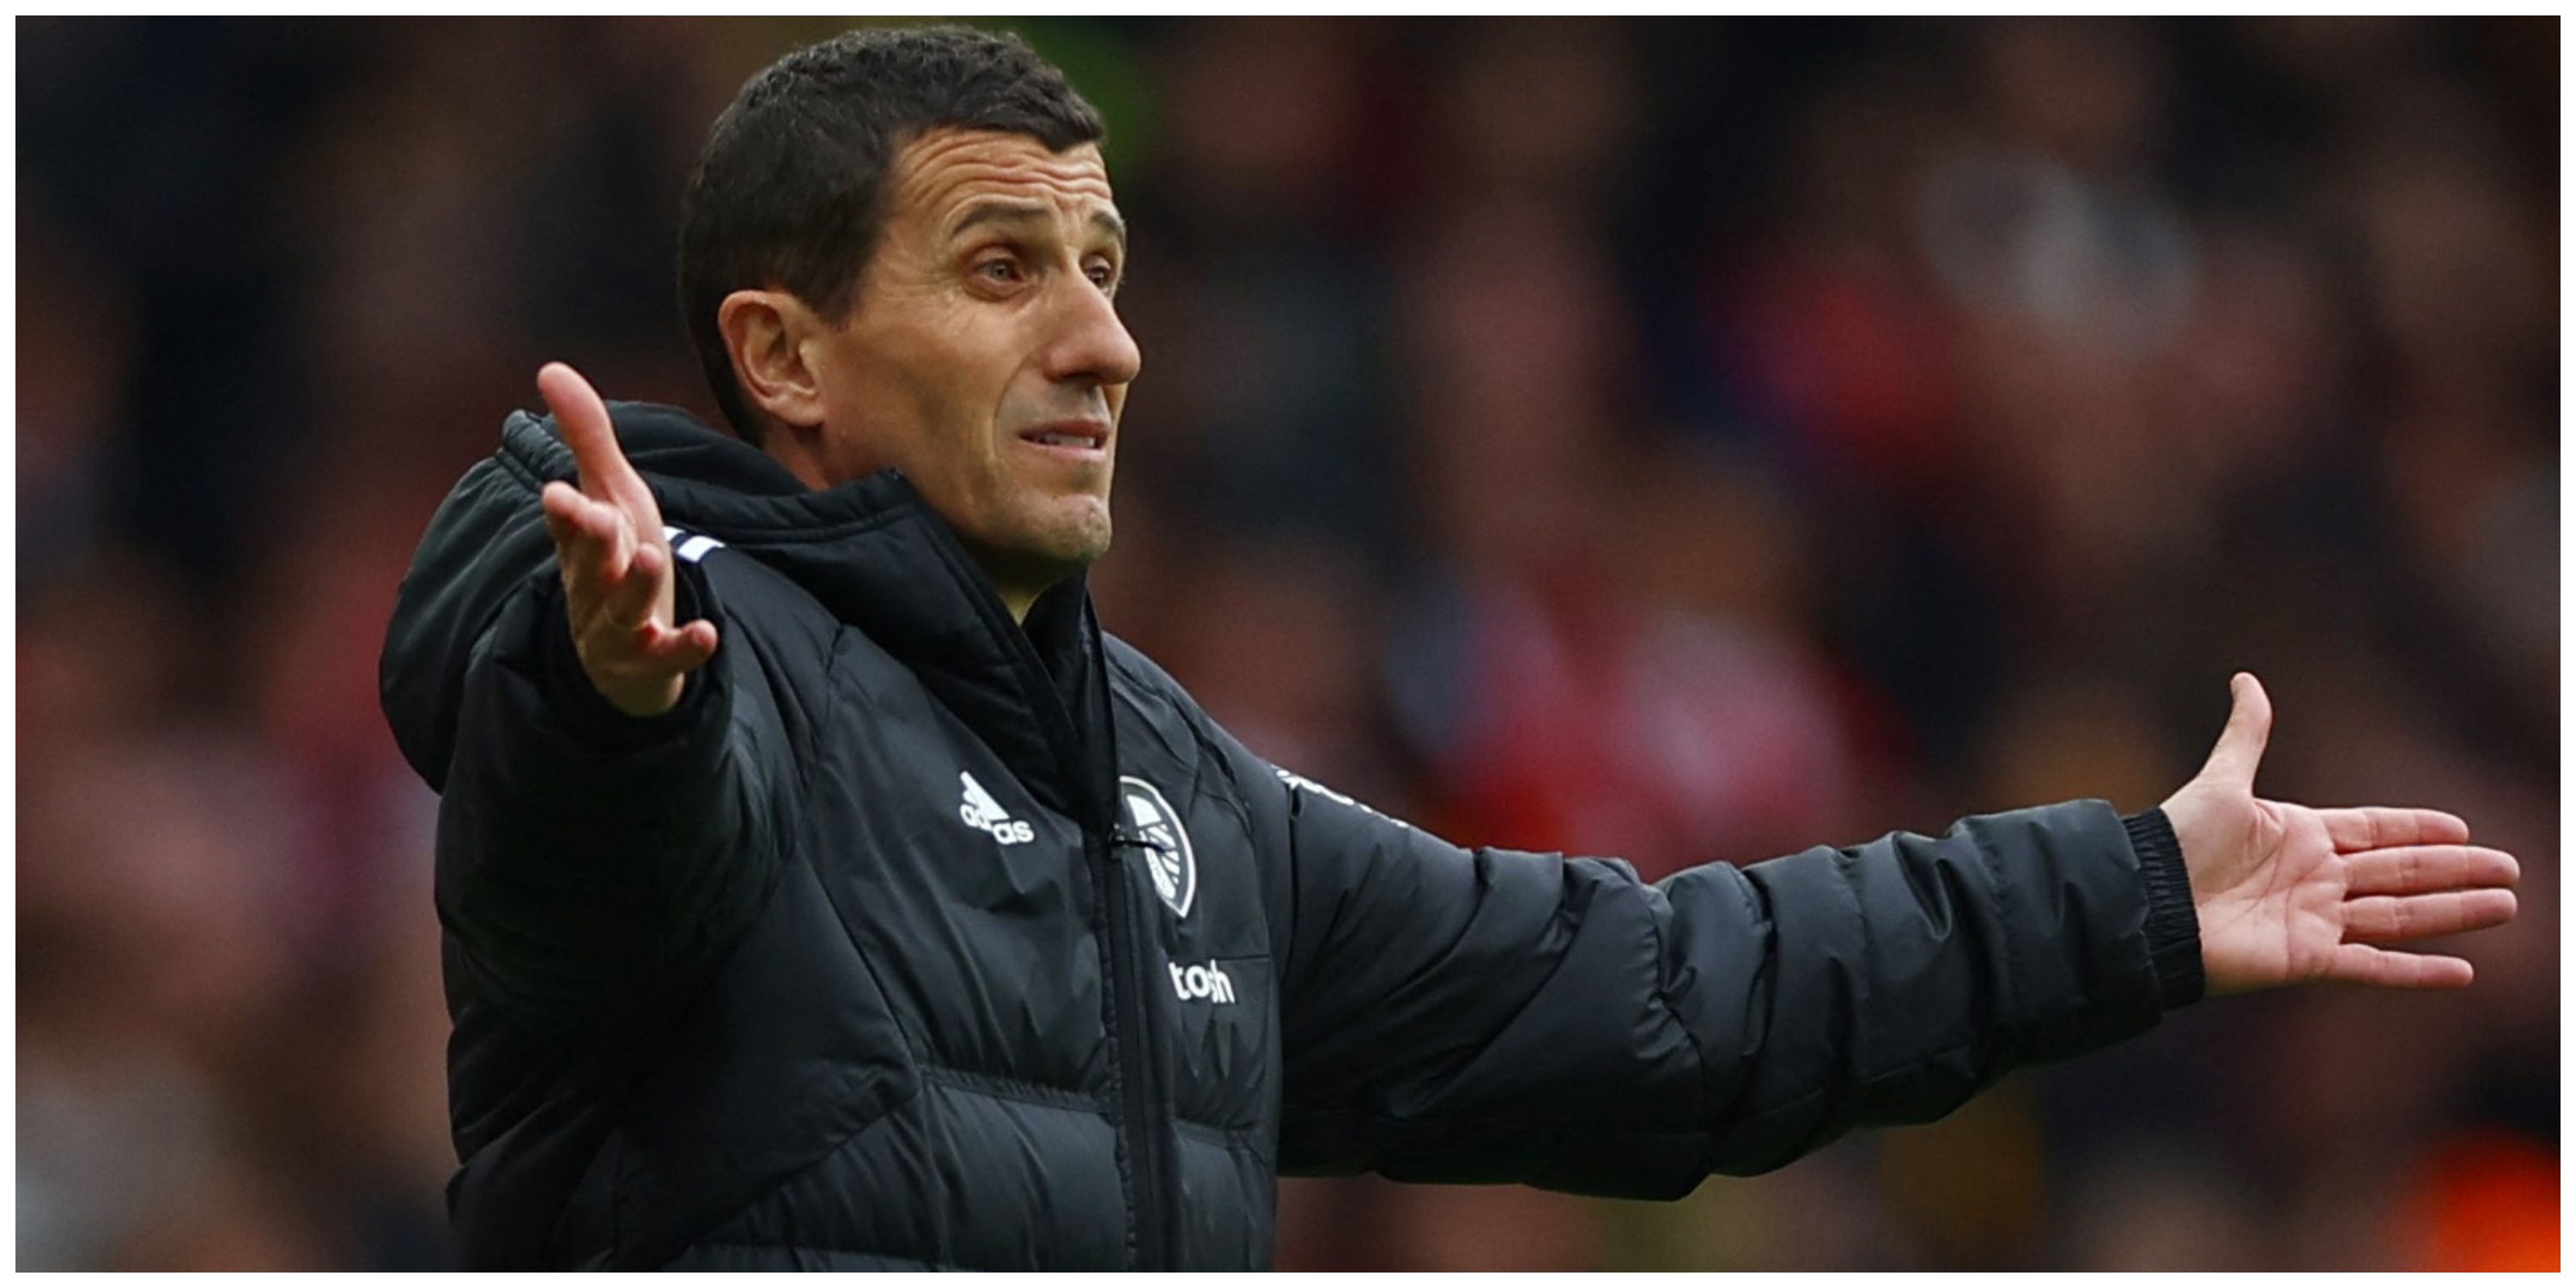 Leeds manager Javi Gracia with arms out